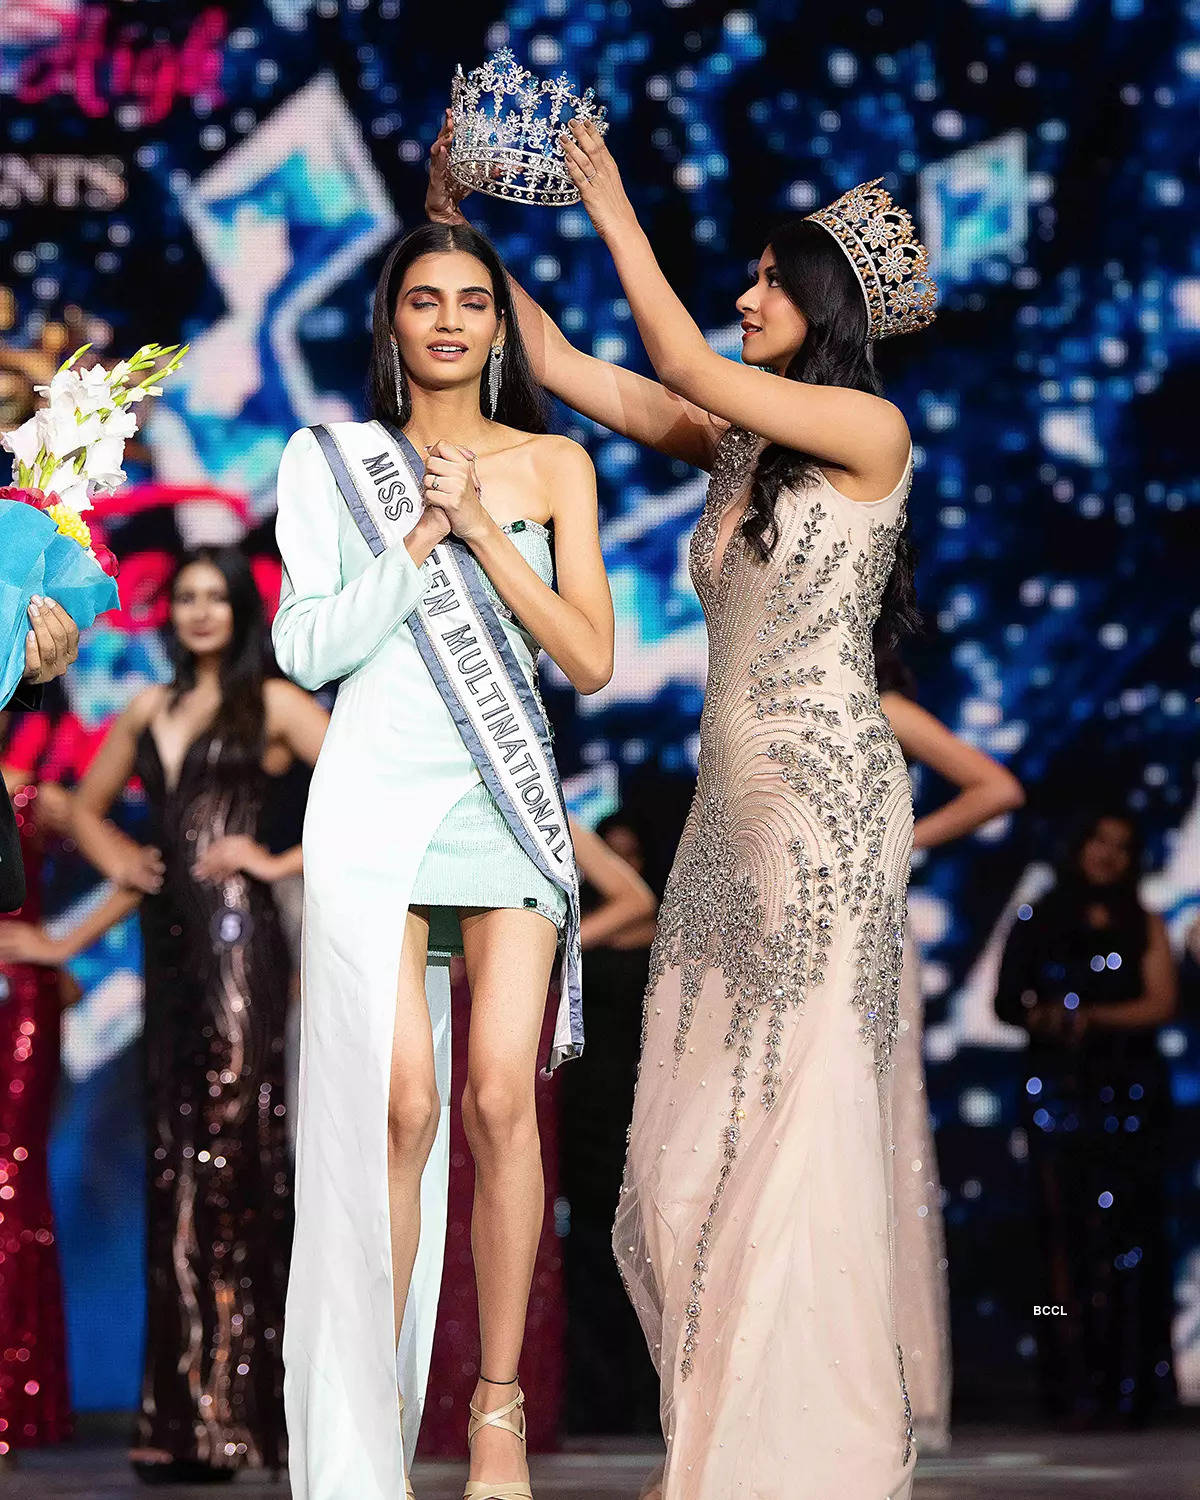 Pictures of Mahika Biyani crowned as Miss Teen Multinational India 2022 at Miss Teen Diva 2021